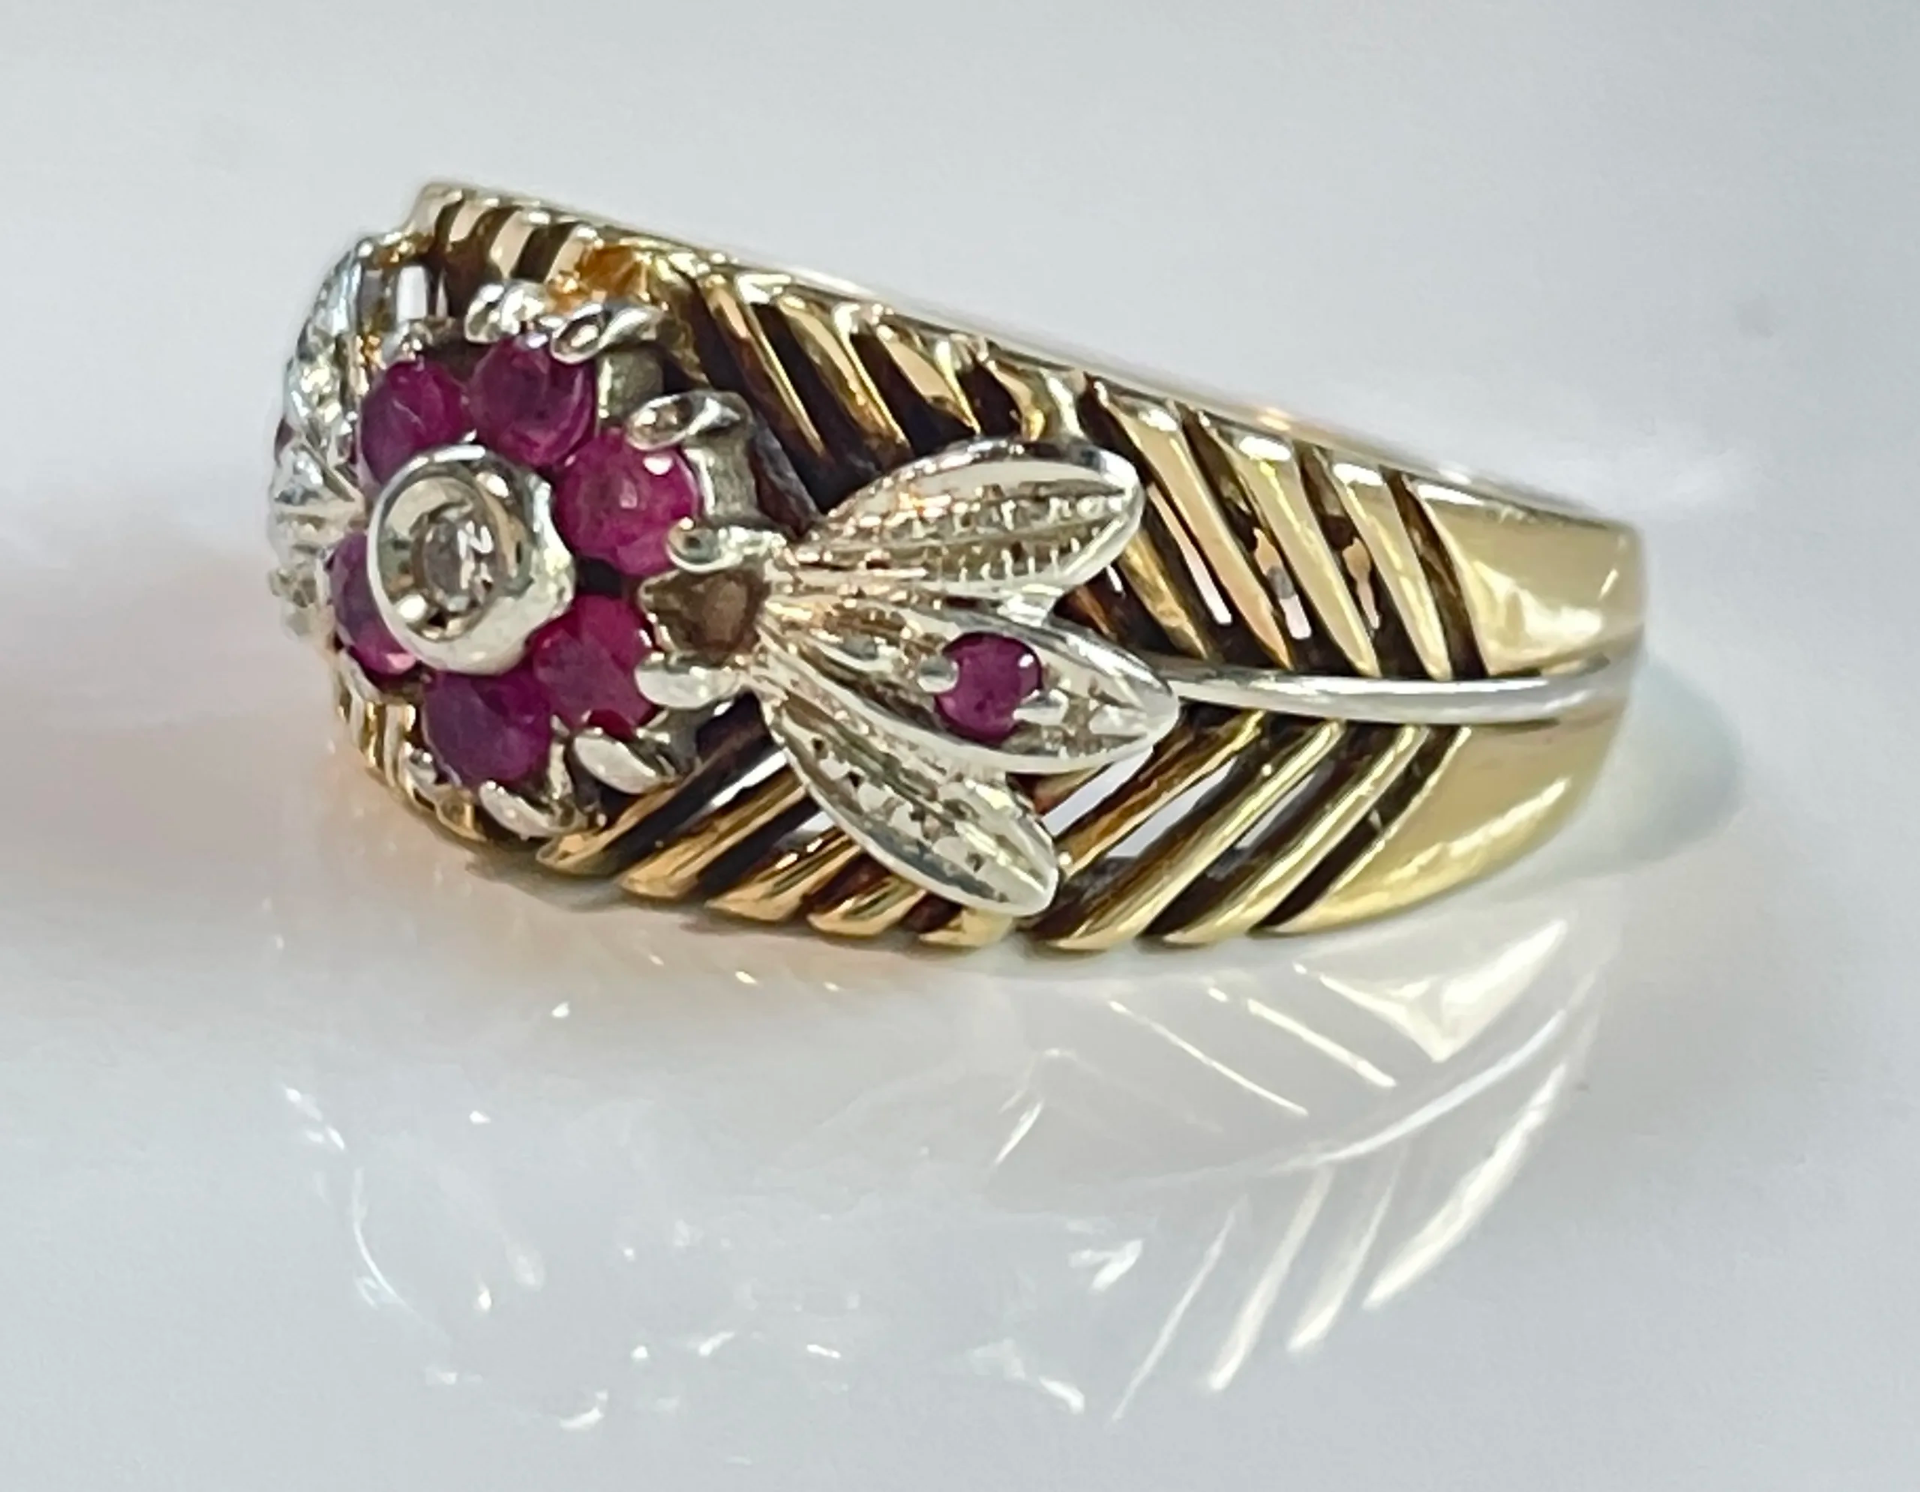 Vintage Rubies with Diamonds ring, 18ct. gold - Image 2 of 4